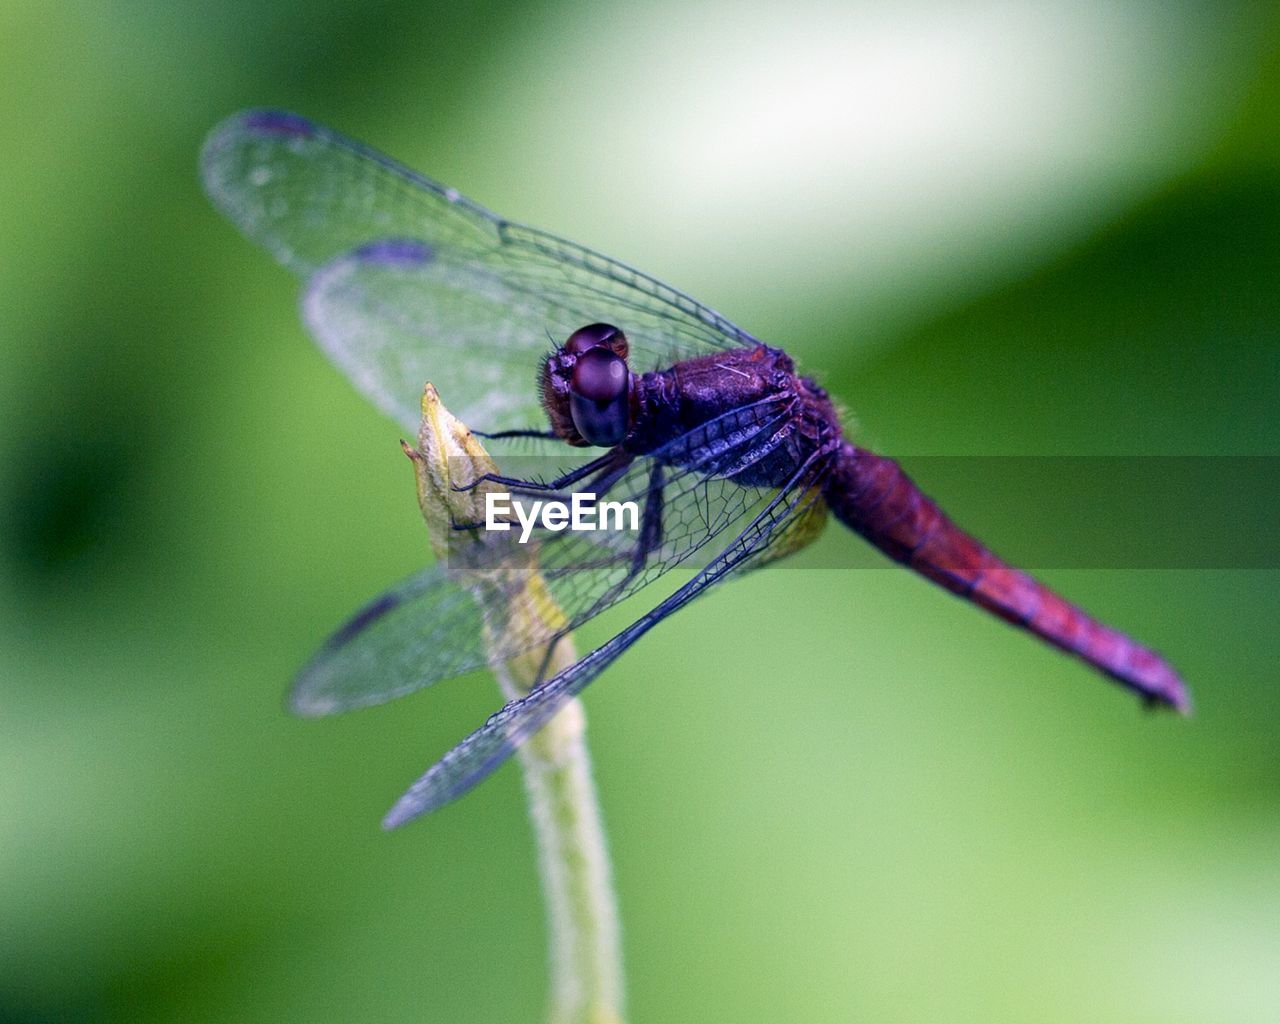 animal themes, dragonflies and damseflies, insect, animal, animal wildlife, dragonfly, animal wing, one animal, wildlife, close-up, macro photography, nature, focus on foreground, green, plant, macro, no people, beauty in nature, plant stem, animal body part, outdoors, day, magnification, wing, zoology, fragility